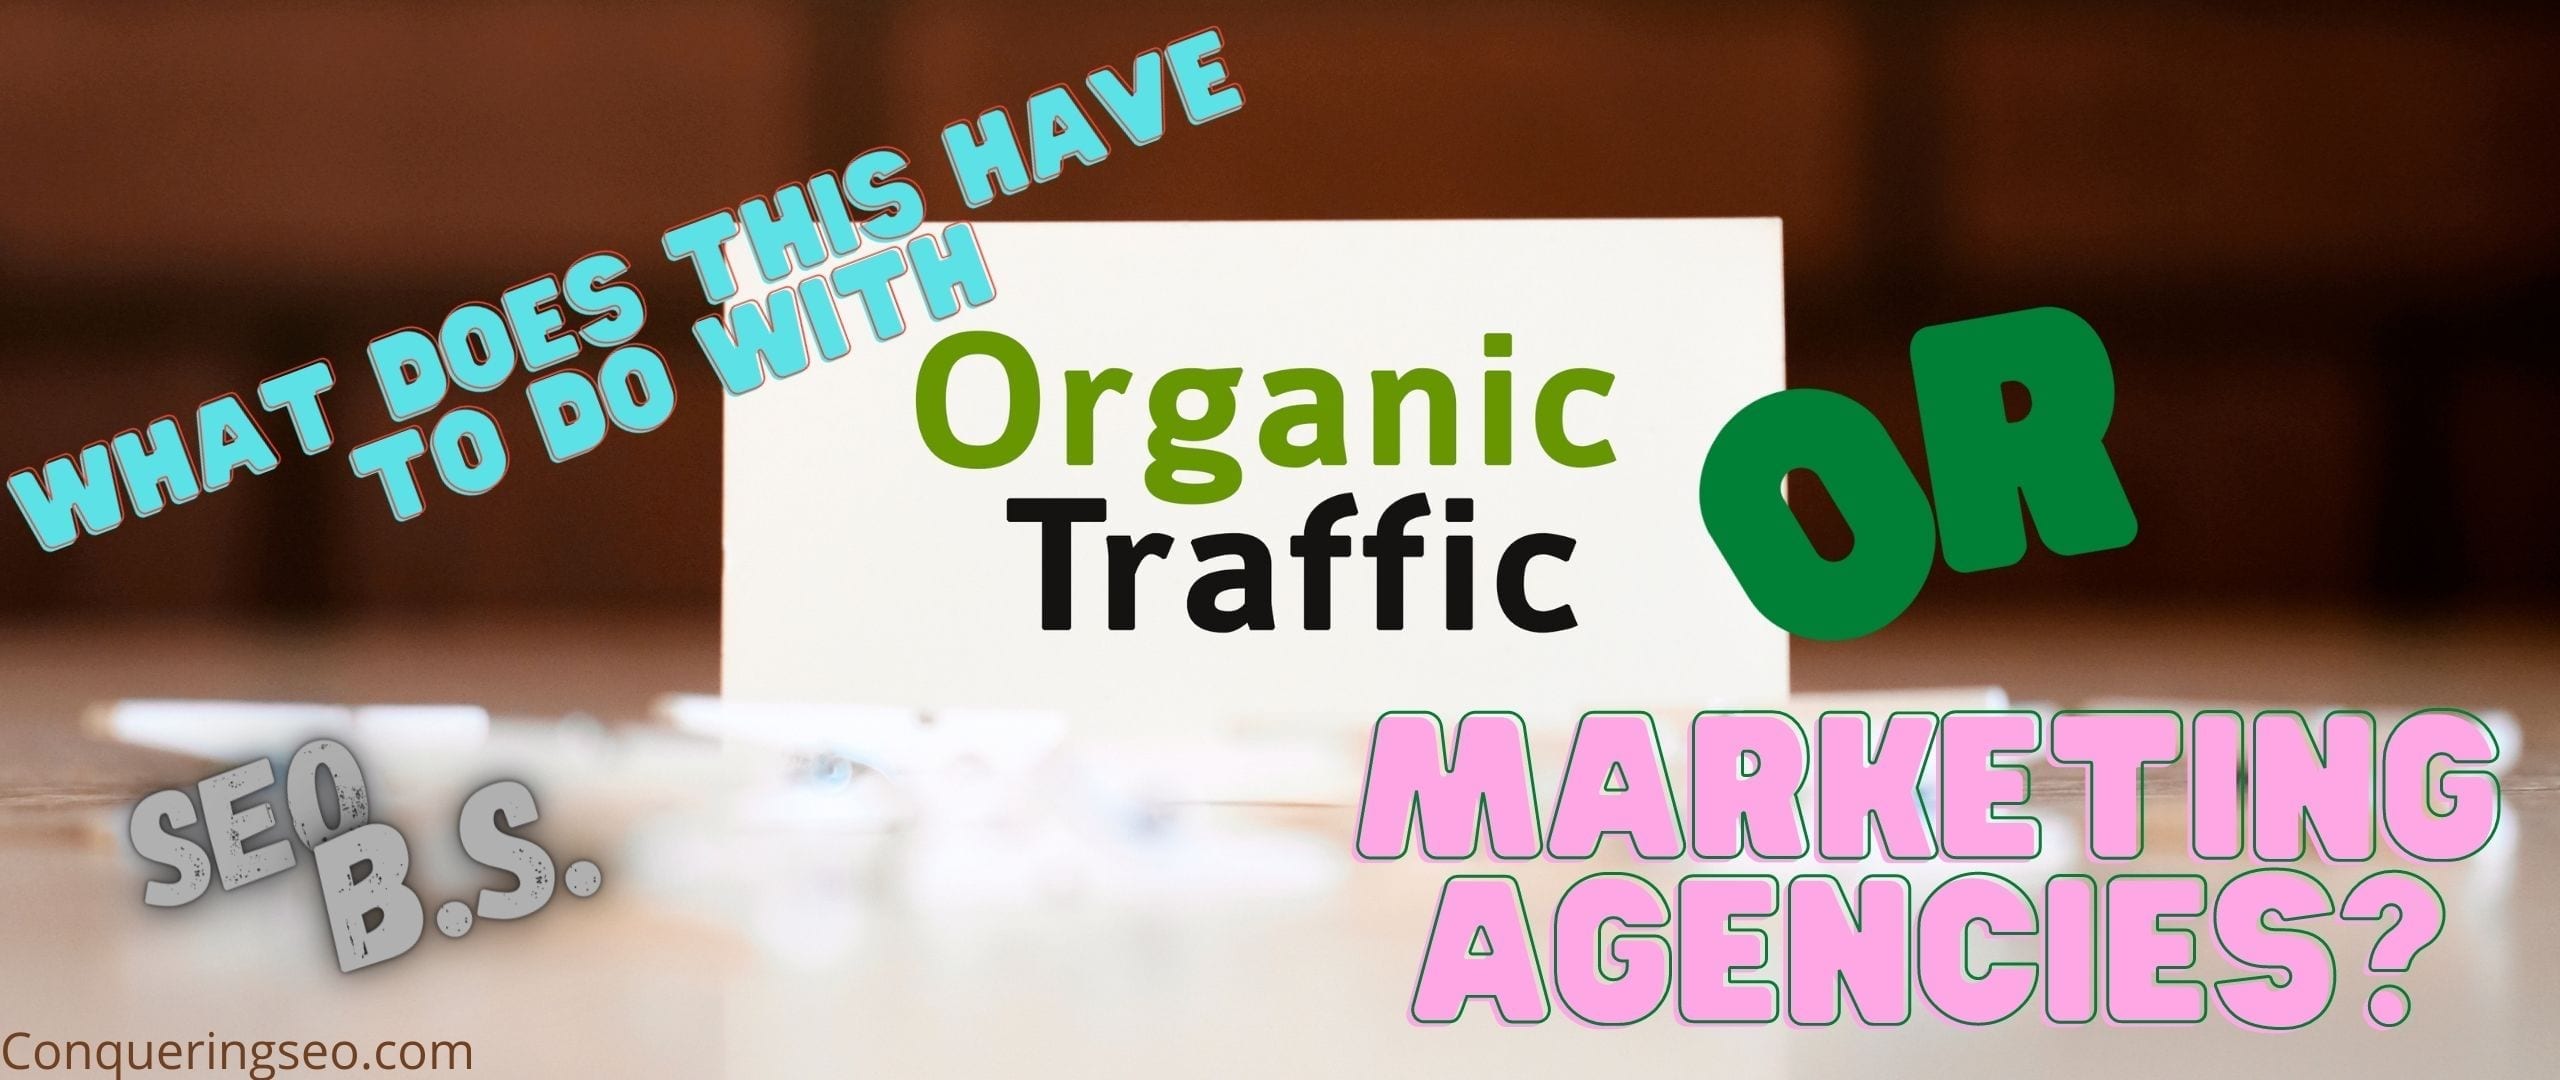 picture of organic traffic or marketing agencies banner